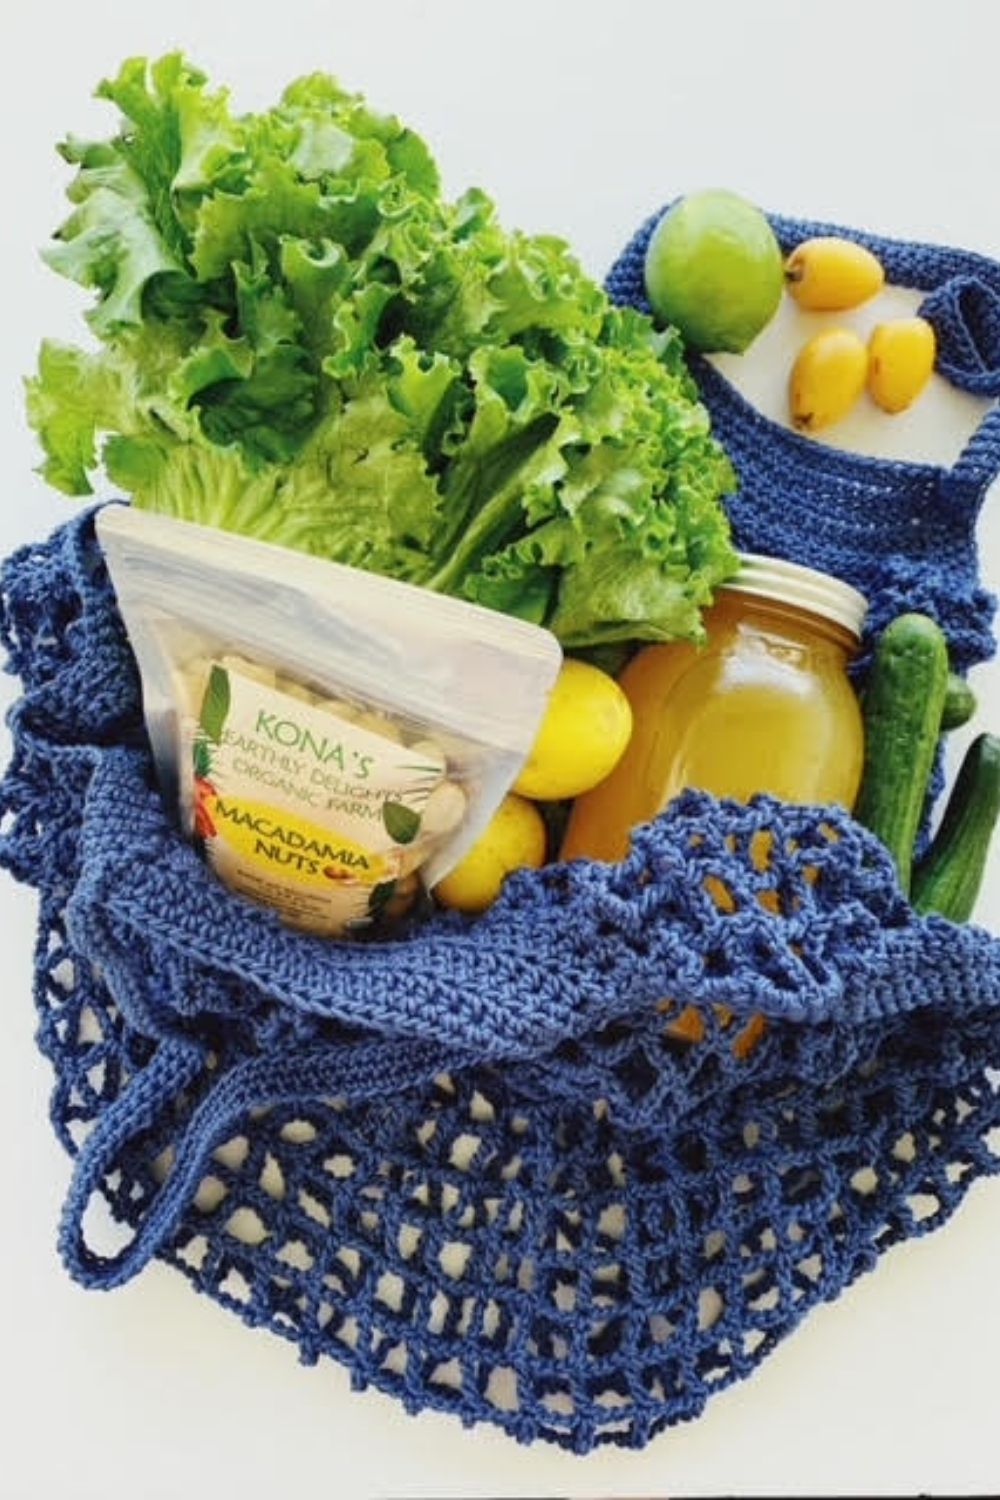 15 Crochet Market Bag Patterns to Whip Up for Your Farmer’s Market Trip